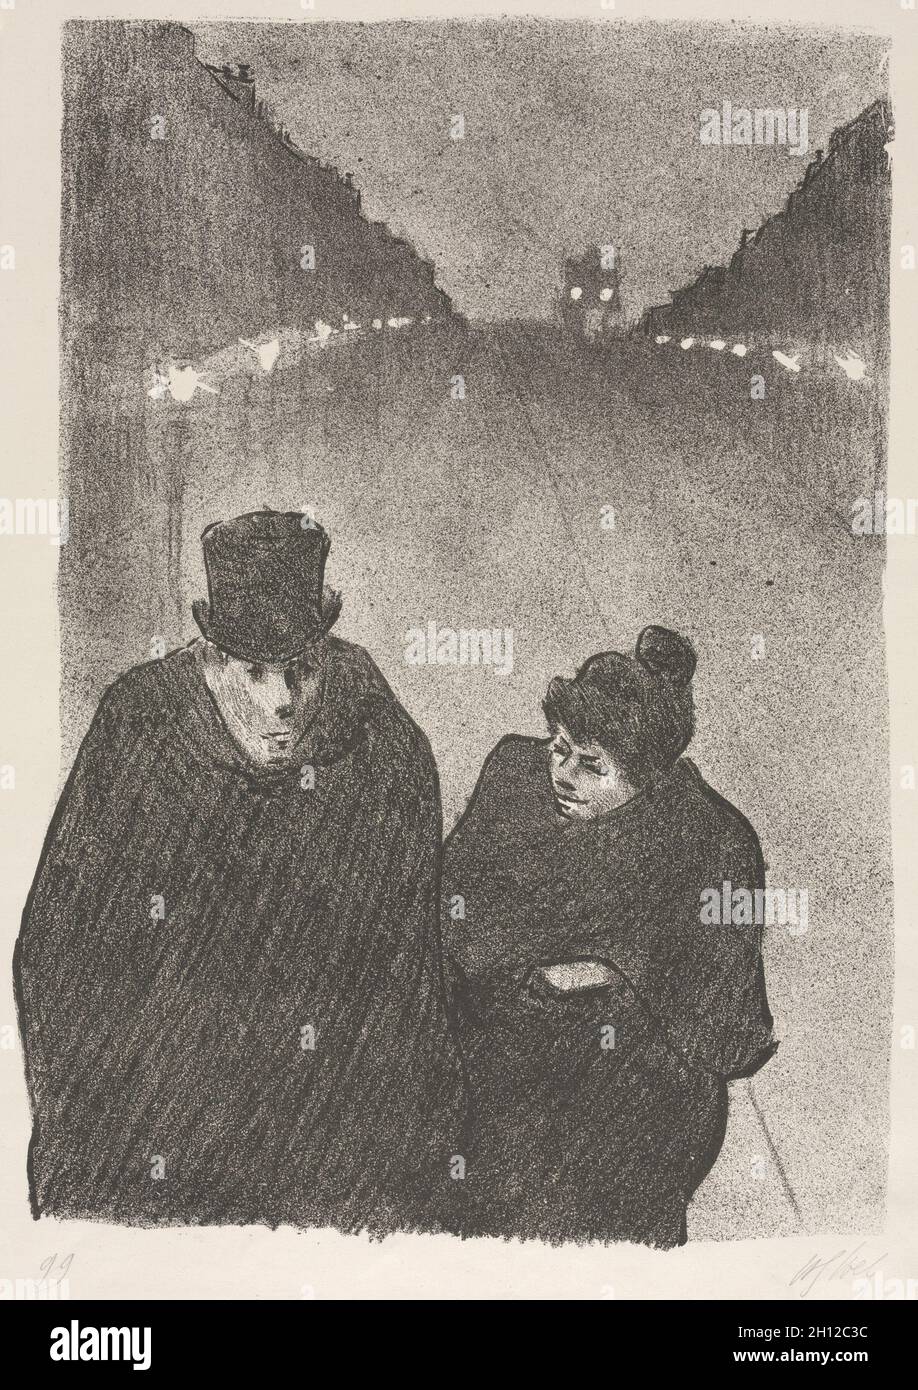 Ah, it's true, my poor old man, you would be the first to whom I would have made to miss his bus. 'But I'll Miss My Bus' 'My Customers Have Never Missed Their Bus', 1893. Henri Gabriel Ibels (French, 1867-1936). Lithograph; sheet: 37.8 x 27.8 cm (14 7/8 x 10 15/16 in.); image: 33 x 23.7 cm (13 x 9 5/16 in.). Stock Photo